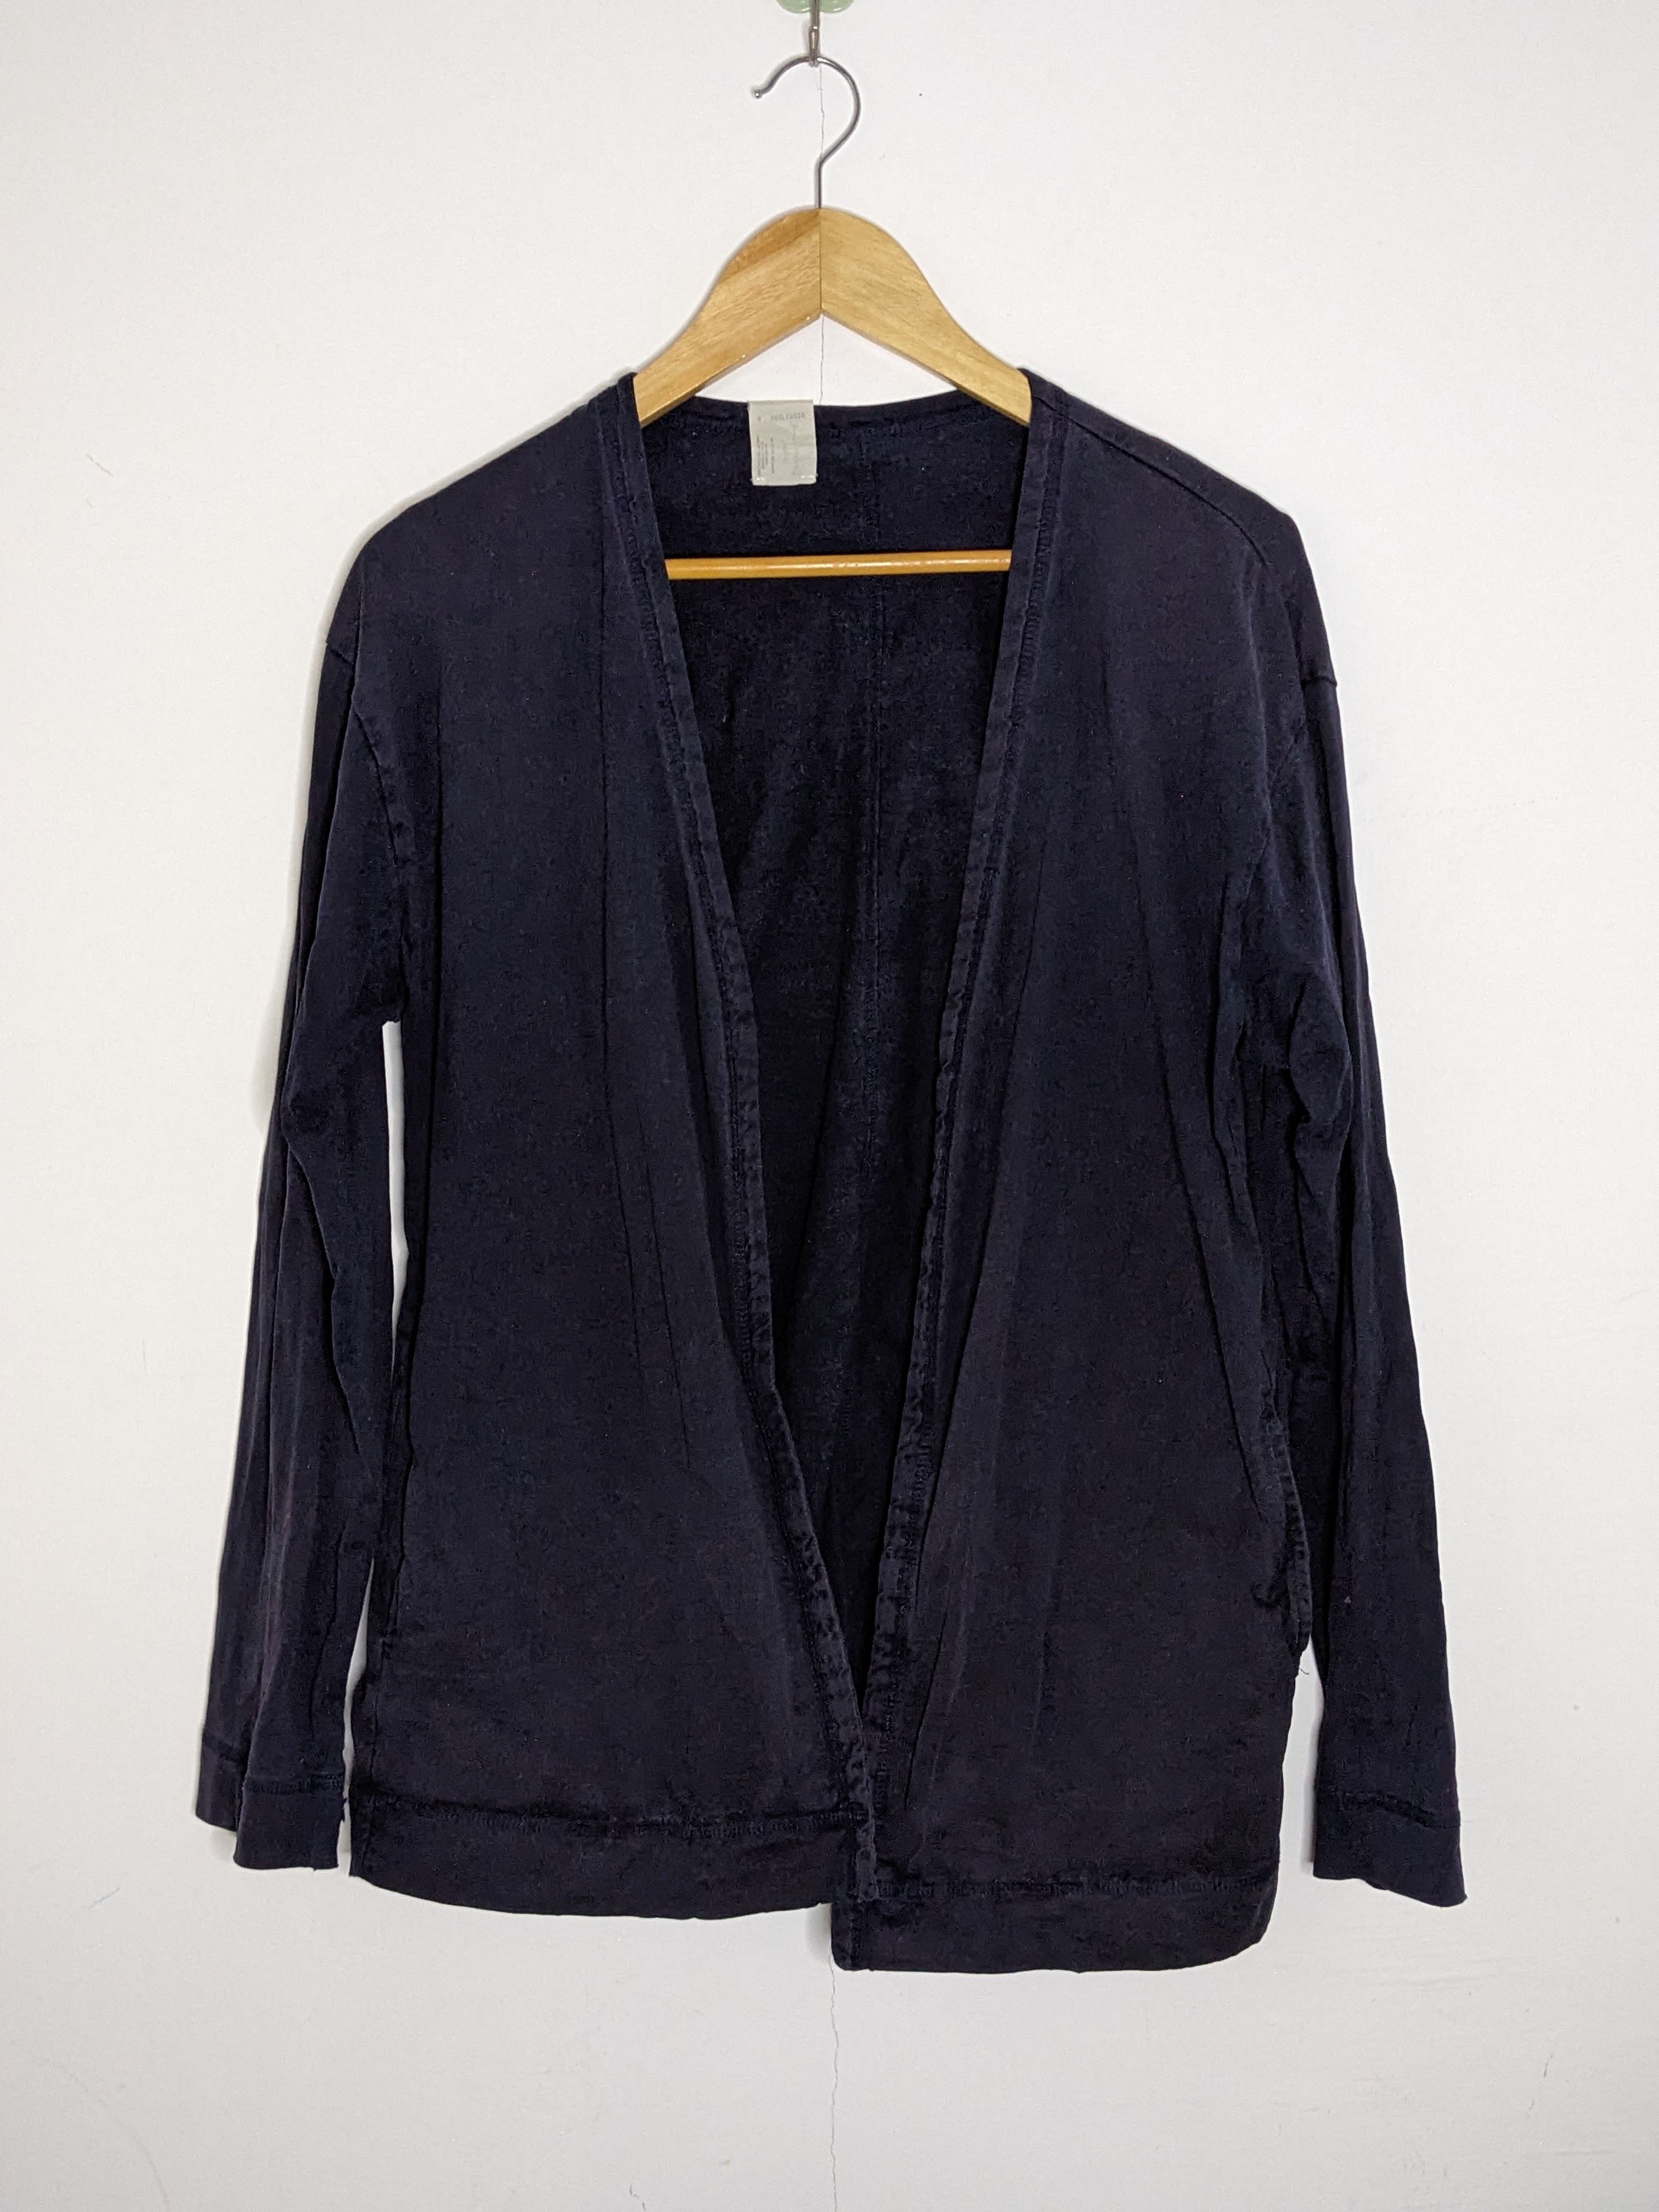 N. Hoolywood Sunfaded Cardigan Buttonless Navy Blue - 1